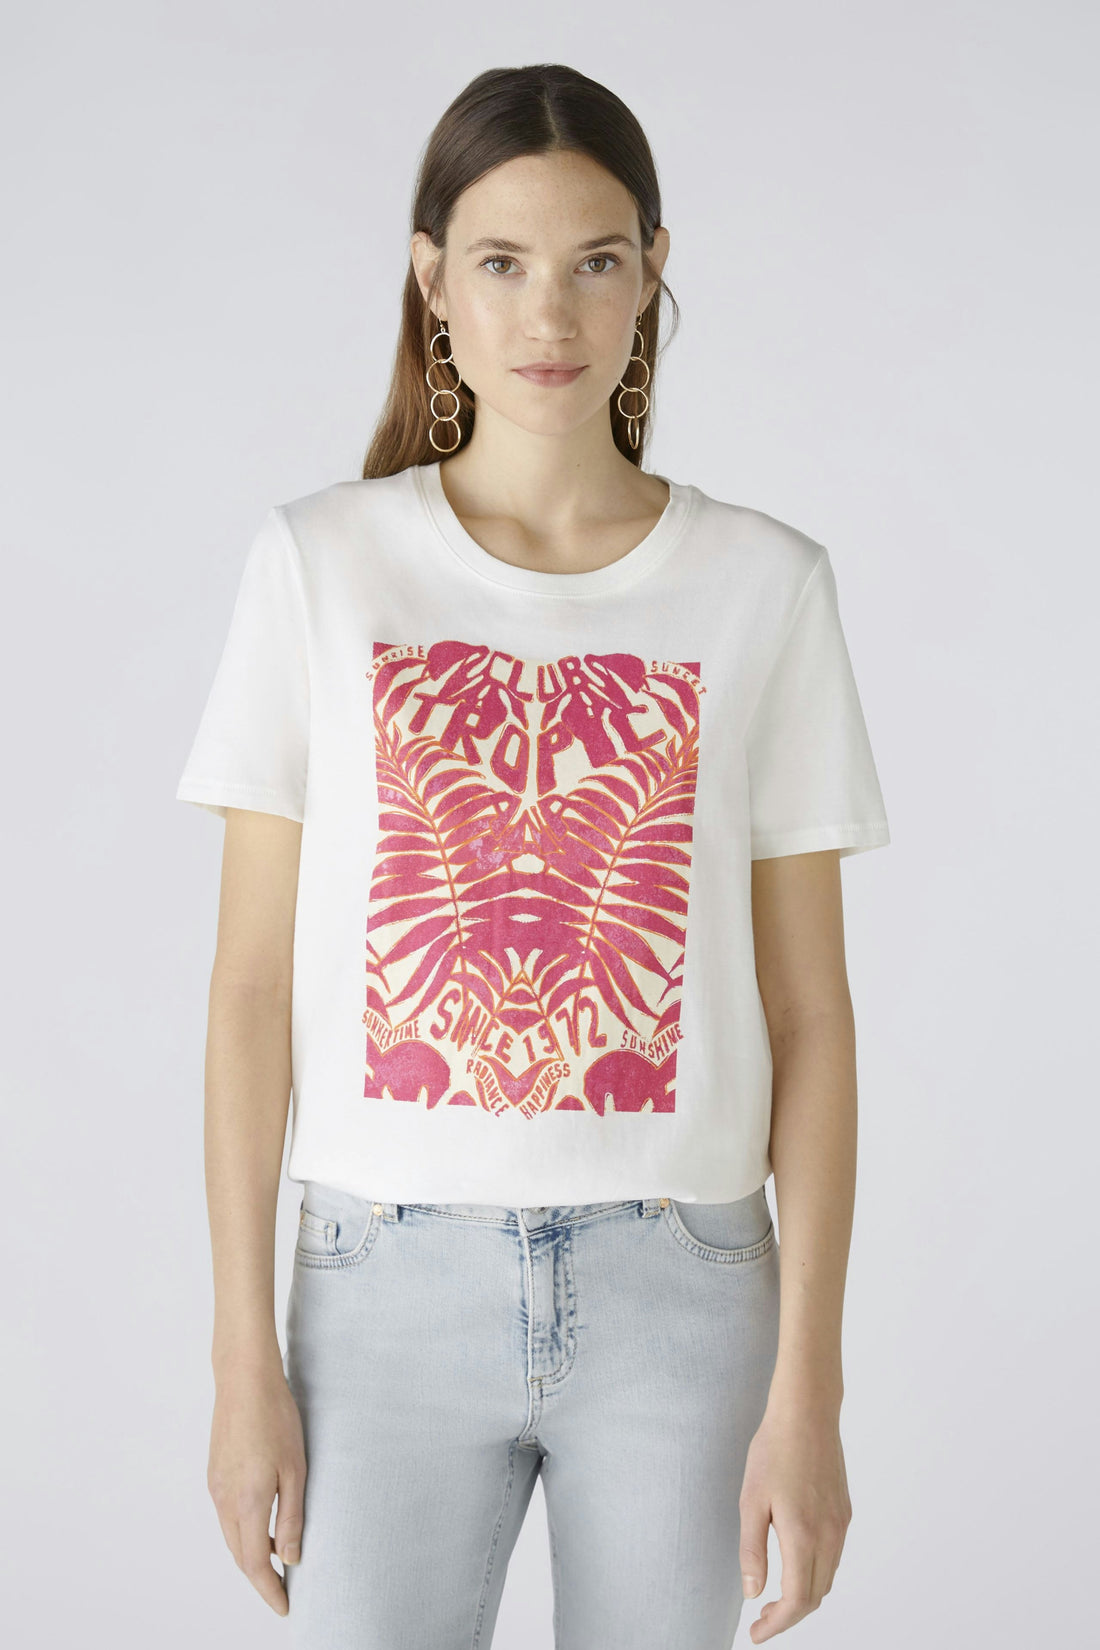 T-Shirt Organic Cotton With Front Print_87382_1006_01